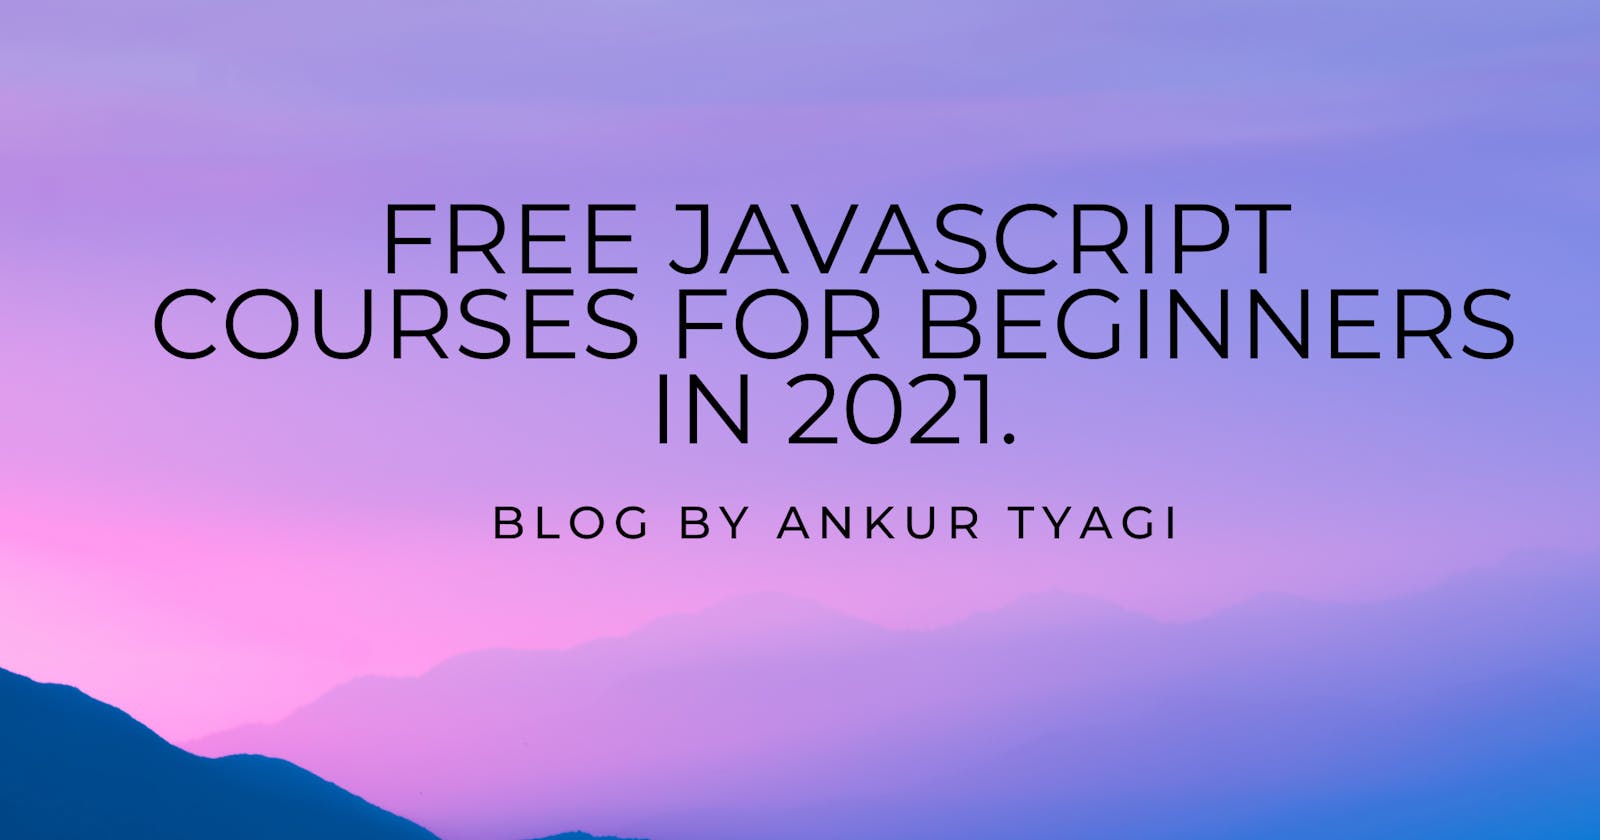 Free JavaScript Courses for Beginners in 2021.